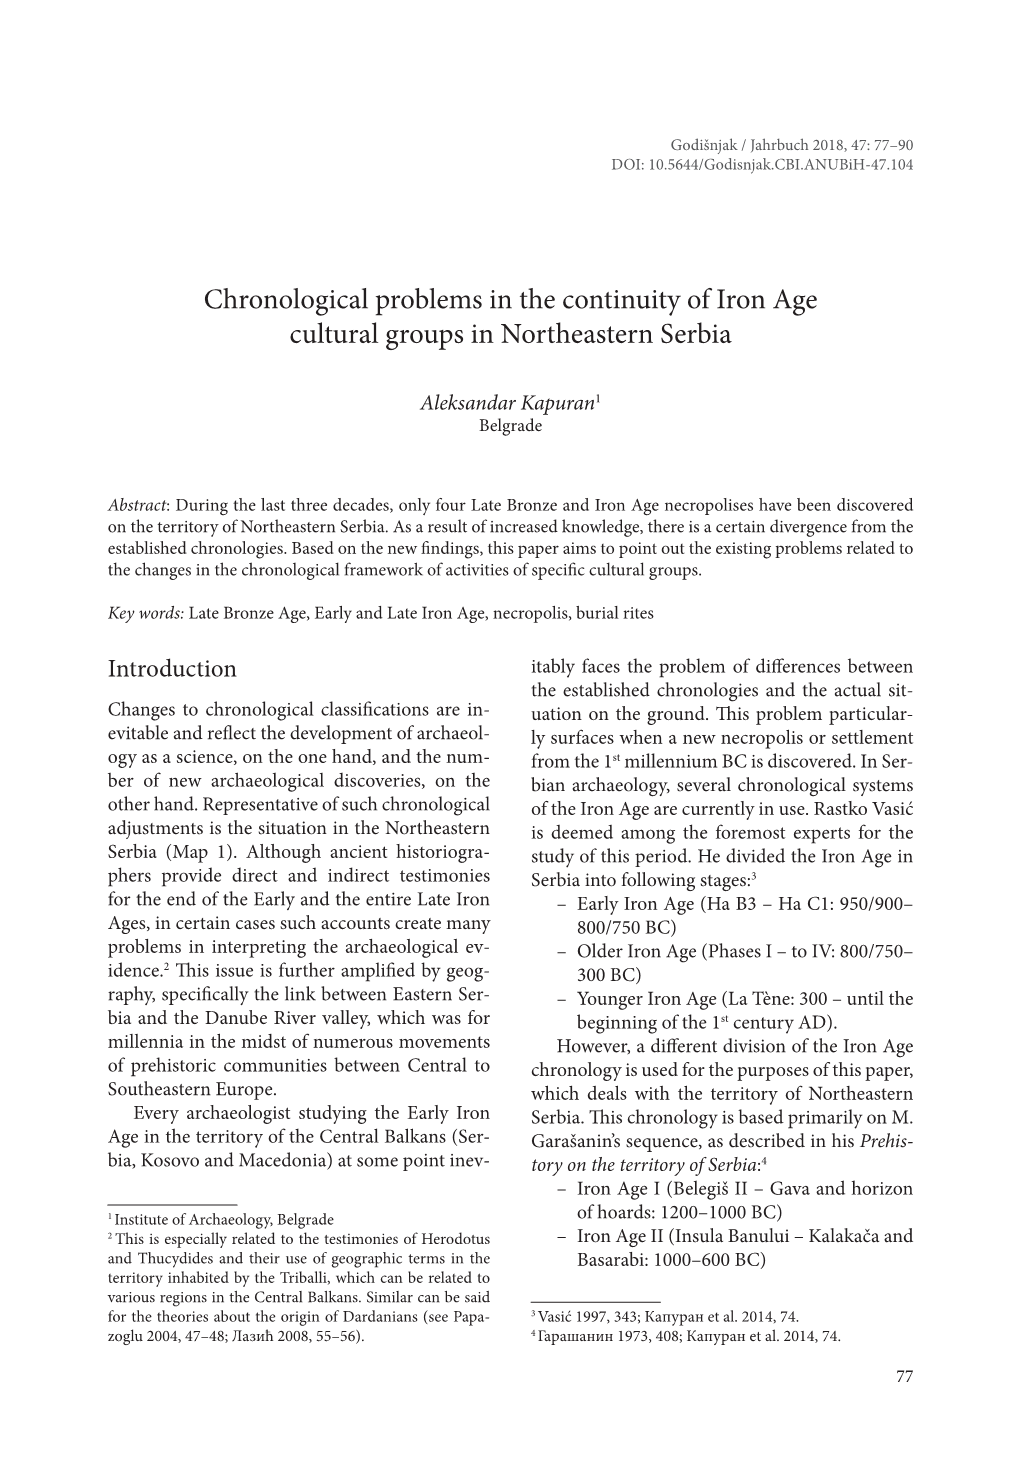 Chronological Problems in the Continuity of Iron Age Cultural Groups in Northeastern Serbia